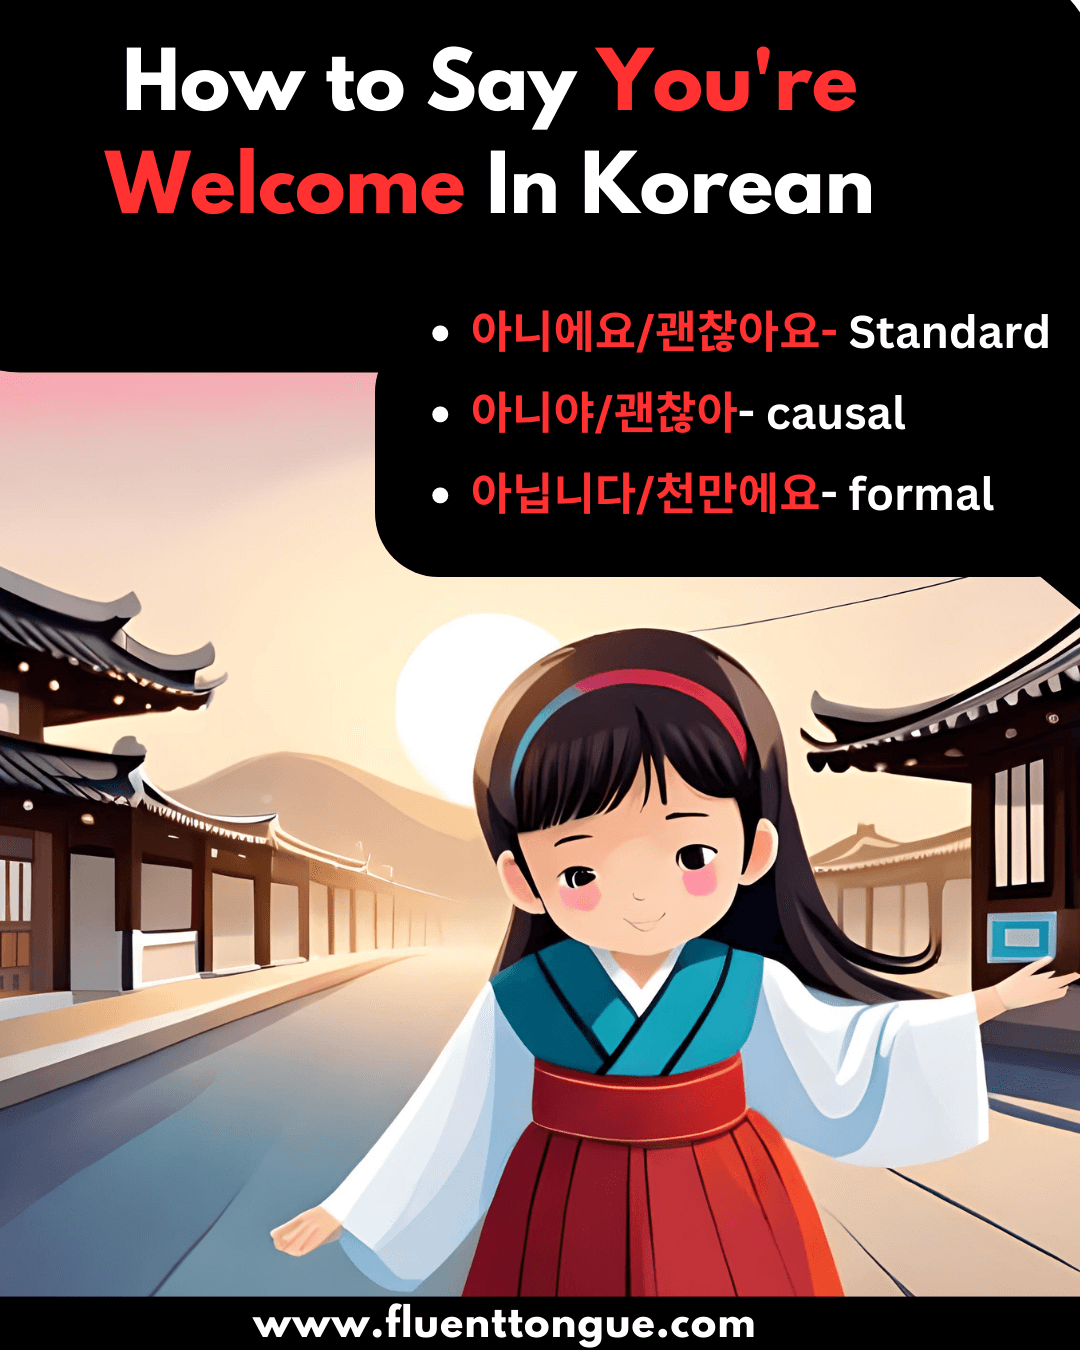 You're welcome in Korean